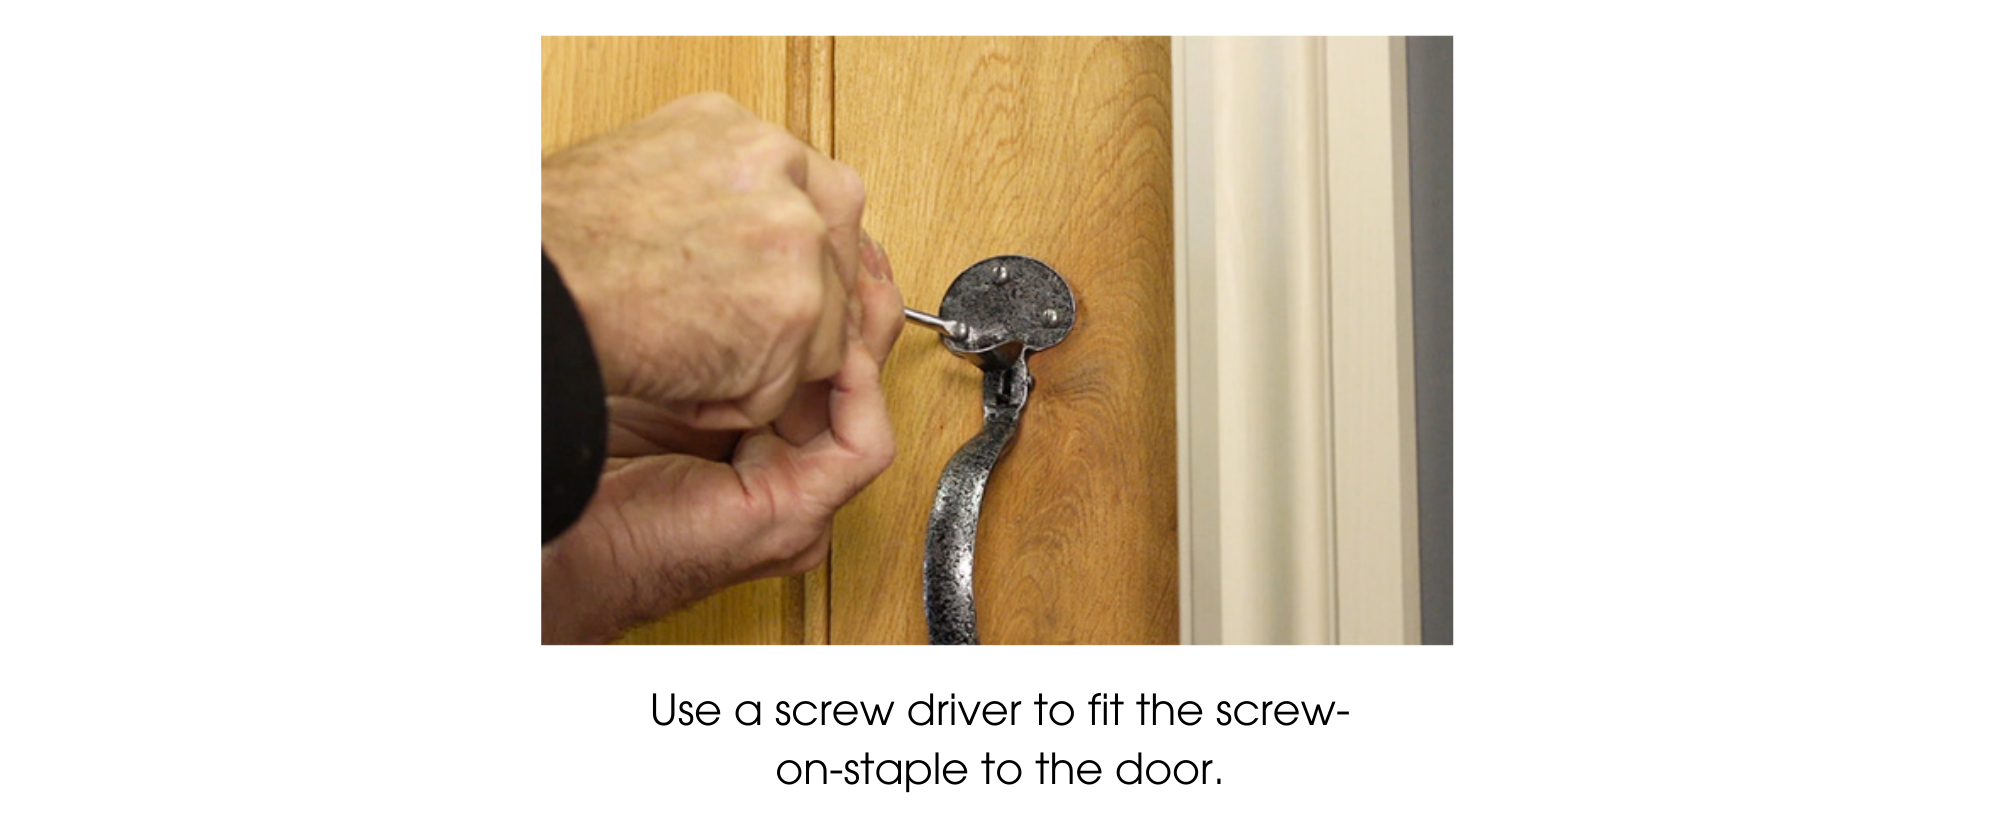 Person using a screw driver to fix a Pewter thumb latch handle to a wooden ledge and brace door.